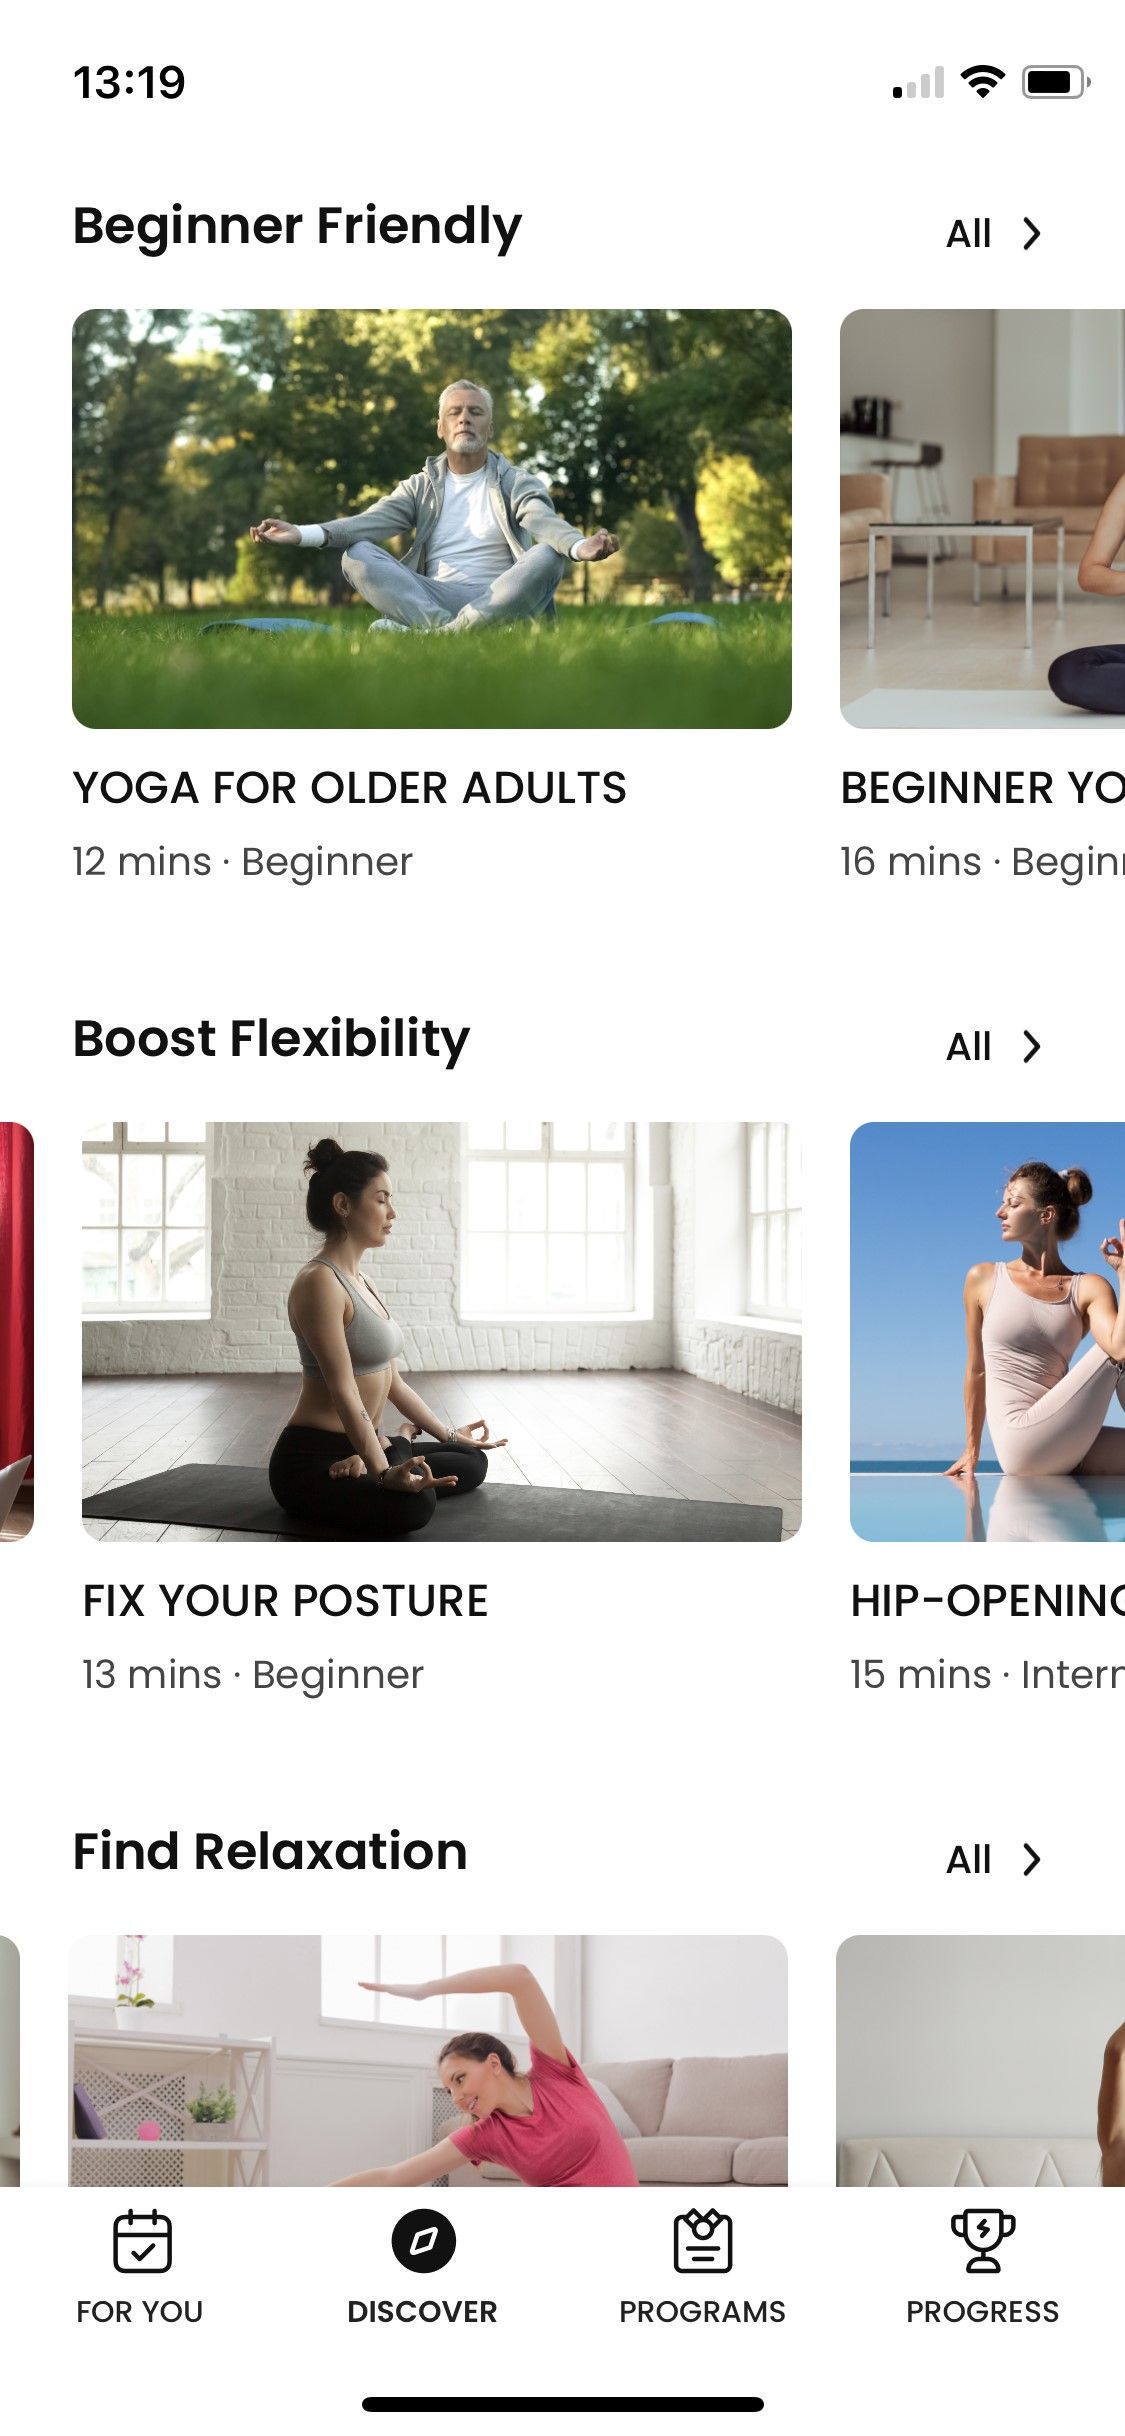 Yoga for beginners app discover tab